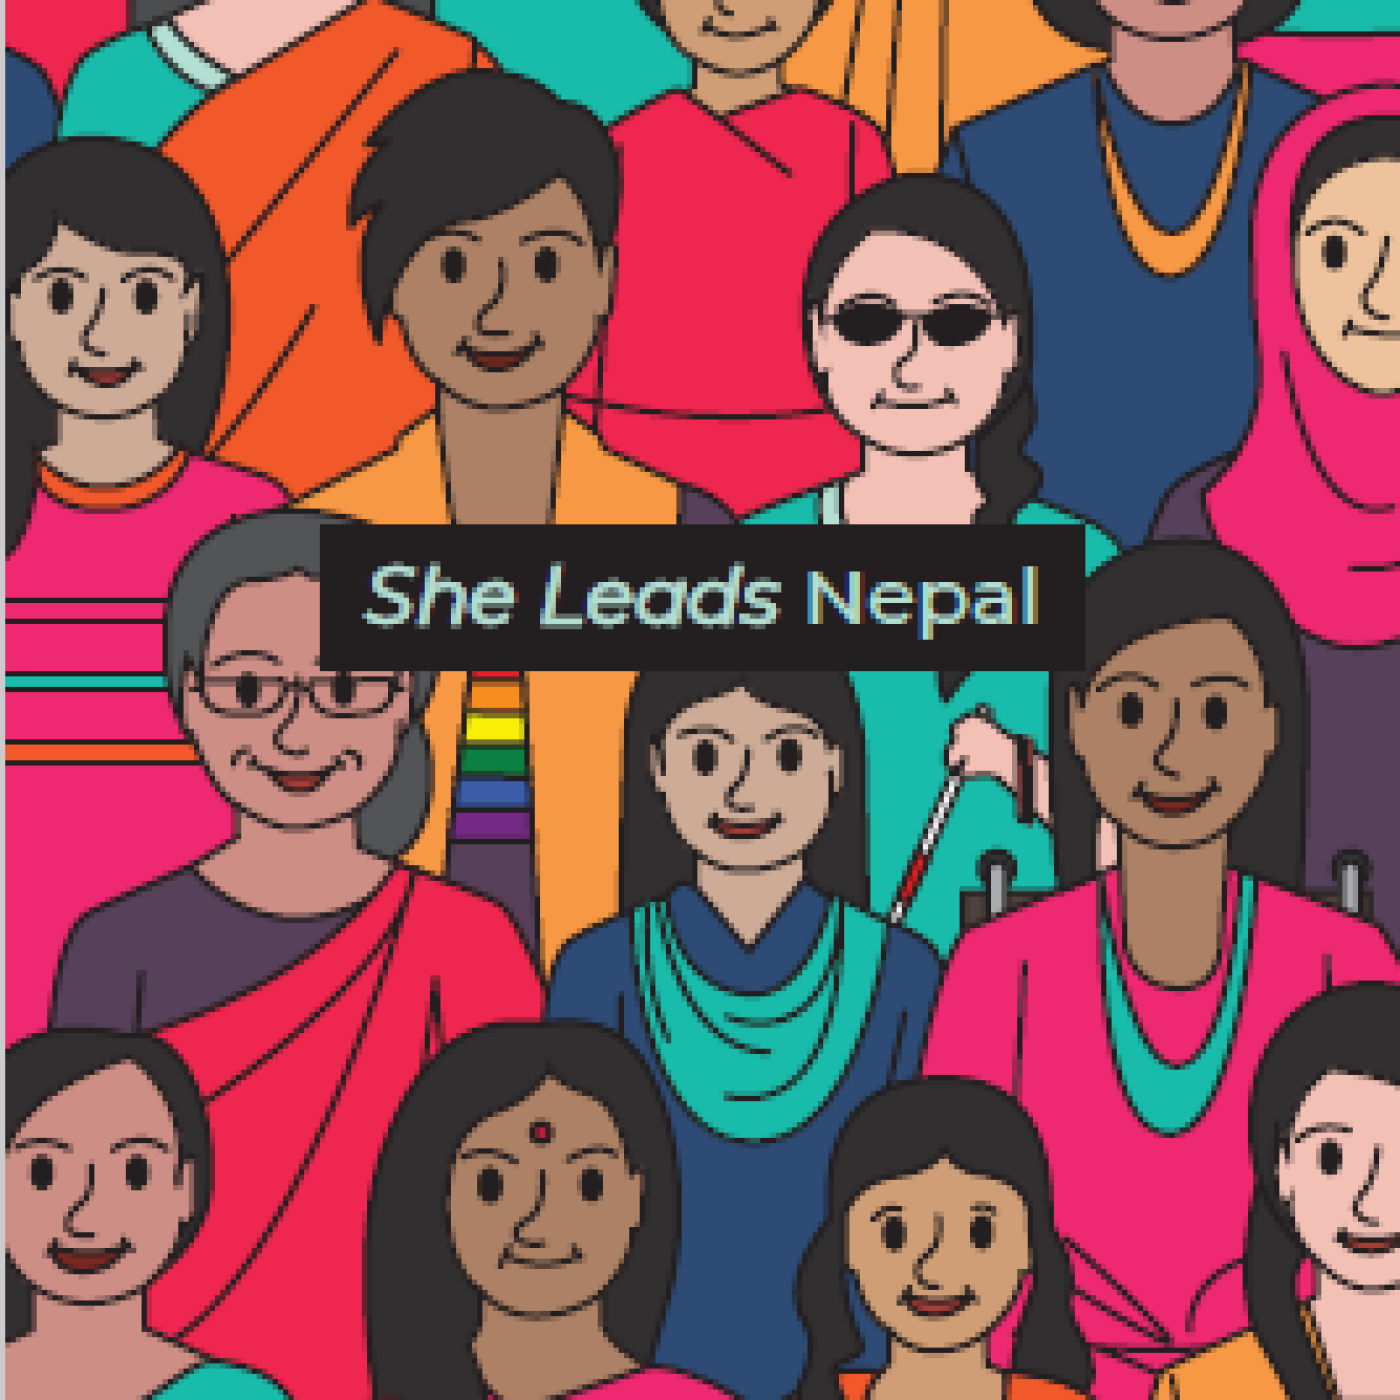 She leads nepal cover photo 